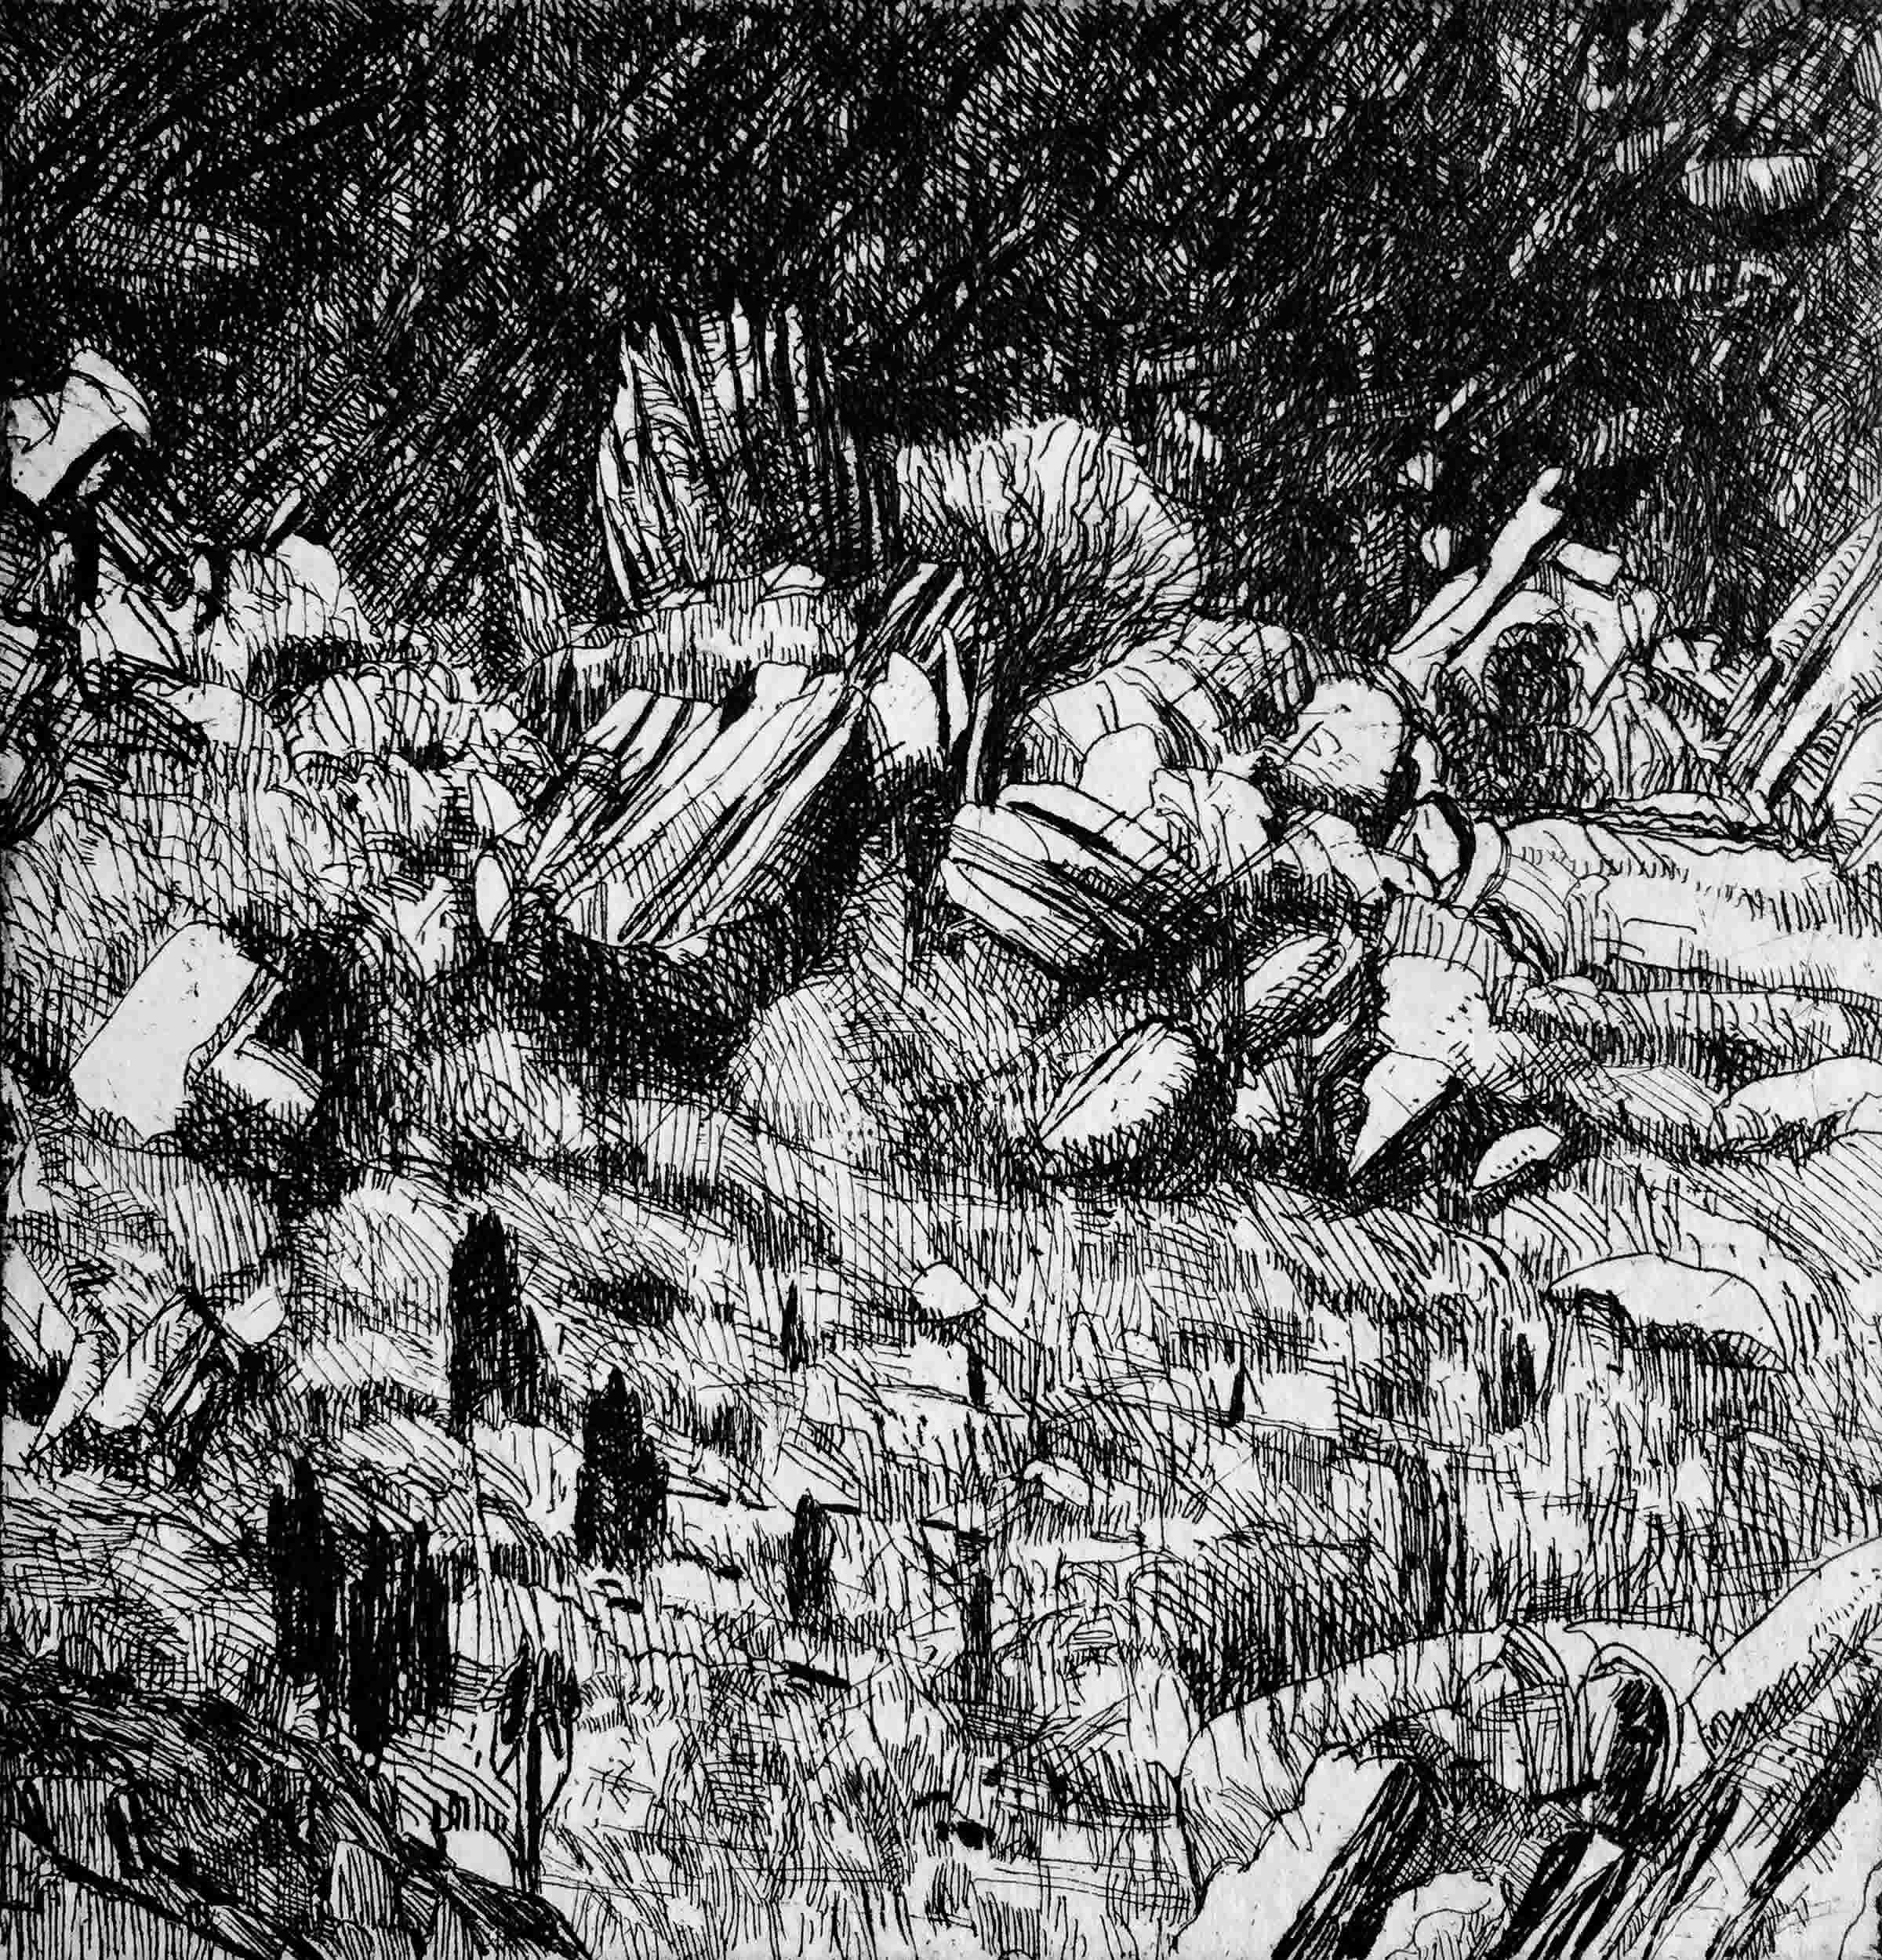 Etching by artist Raymond Arnold titled Mt Lyell V (2012) showing a black and white landscape strewn with rocks with an occasional tree.